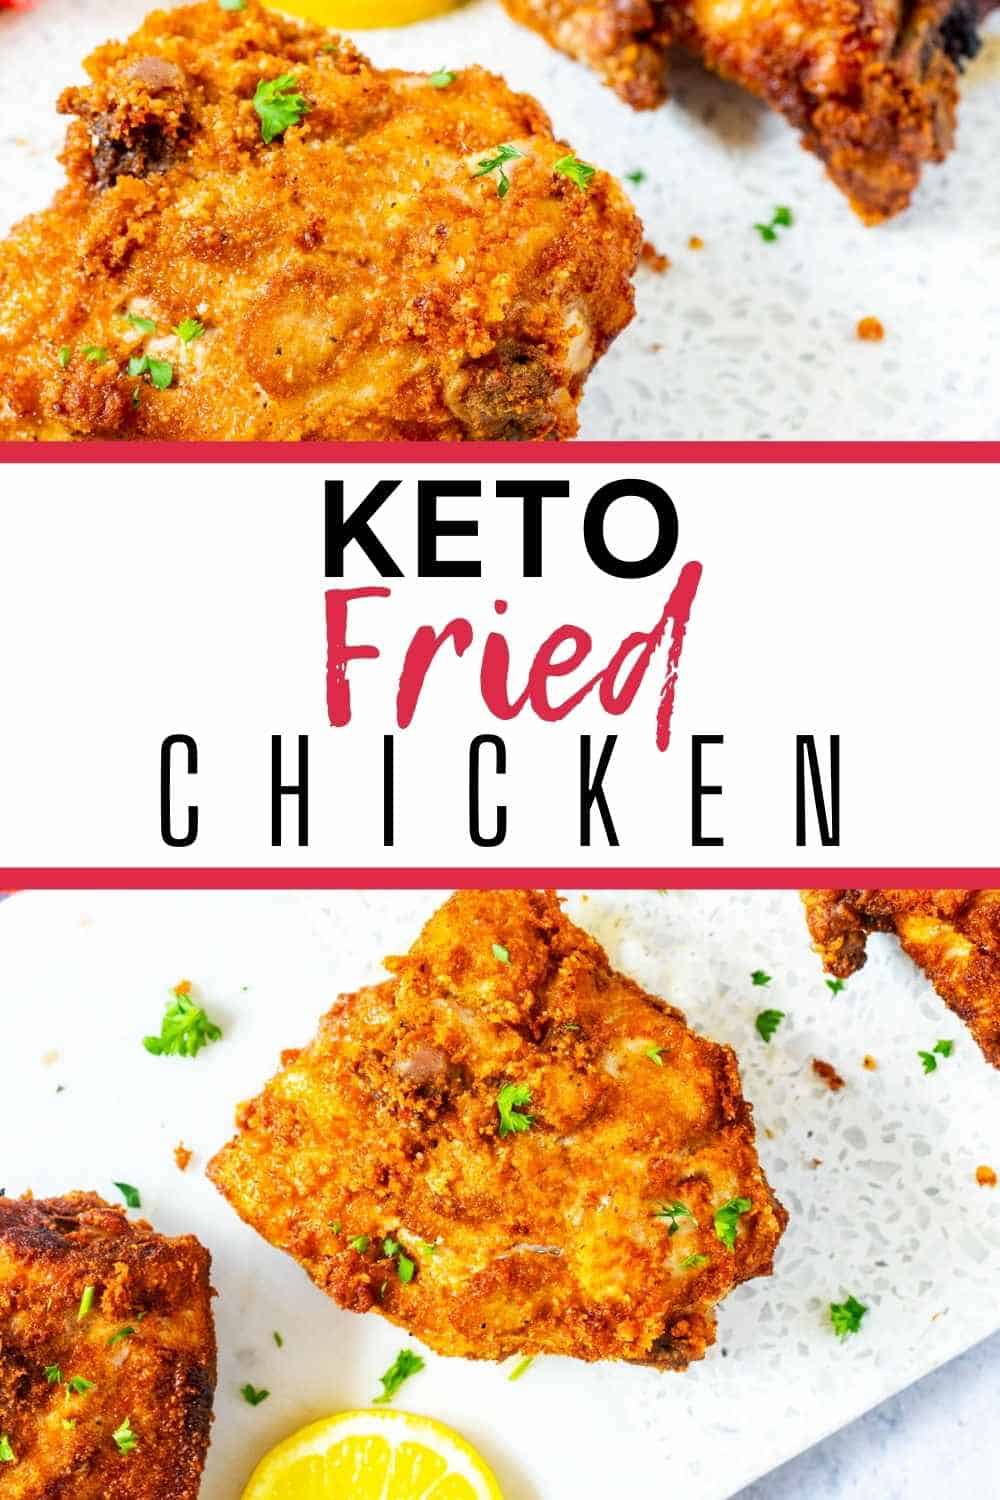 Keto Fried Chicken - Air Fry or Fry - Kicking Carbs